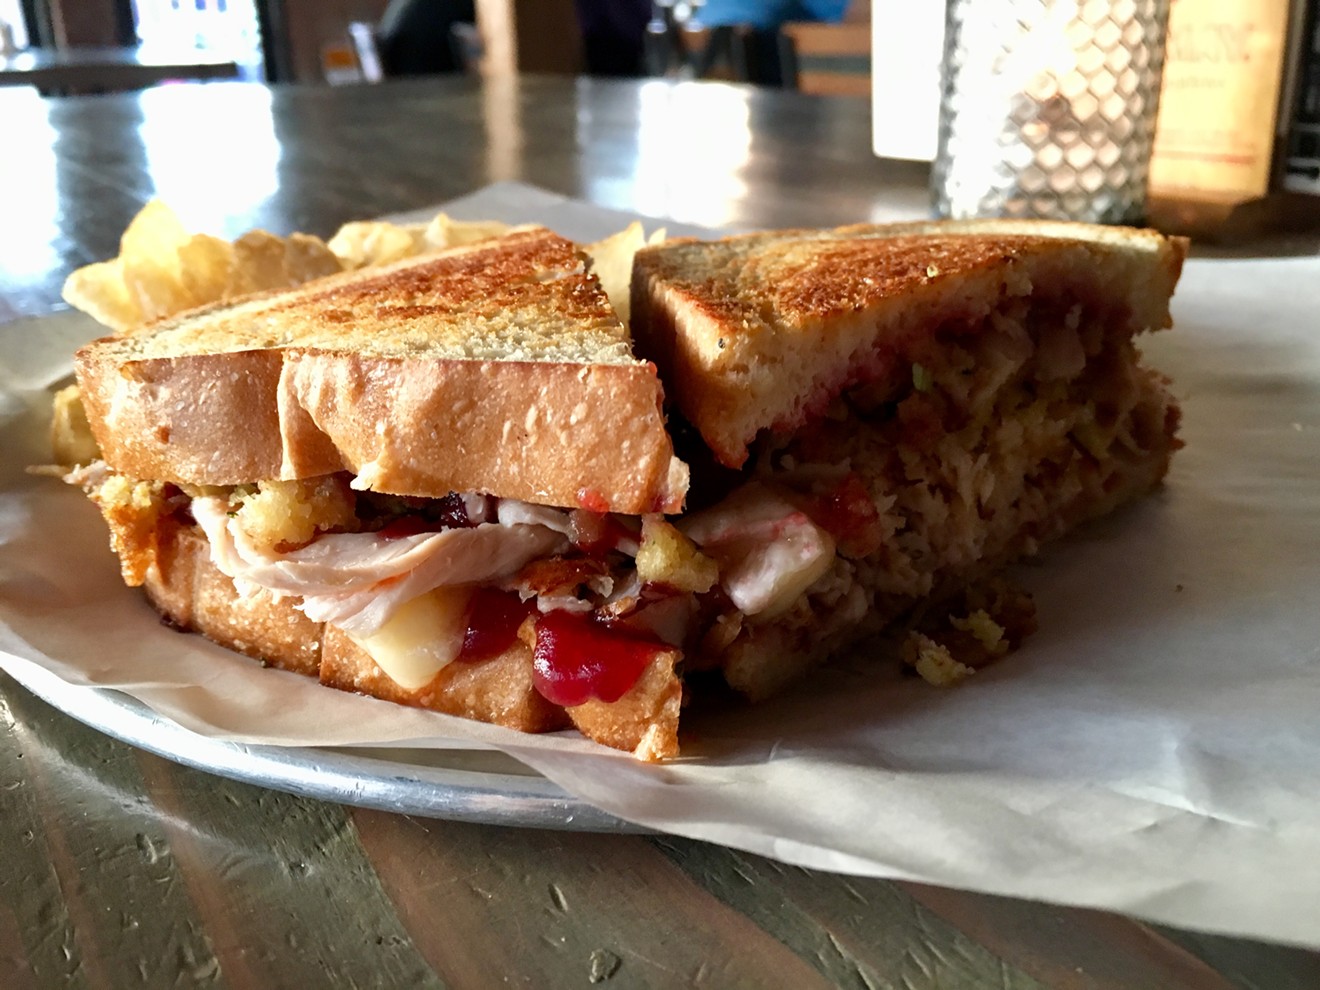 Deep Ellum's Cold Beer Co. is running a special: the leftovers sandwich, with hickory-smoked turkey, stuffing, brie and cranberry sauce for $12.